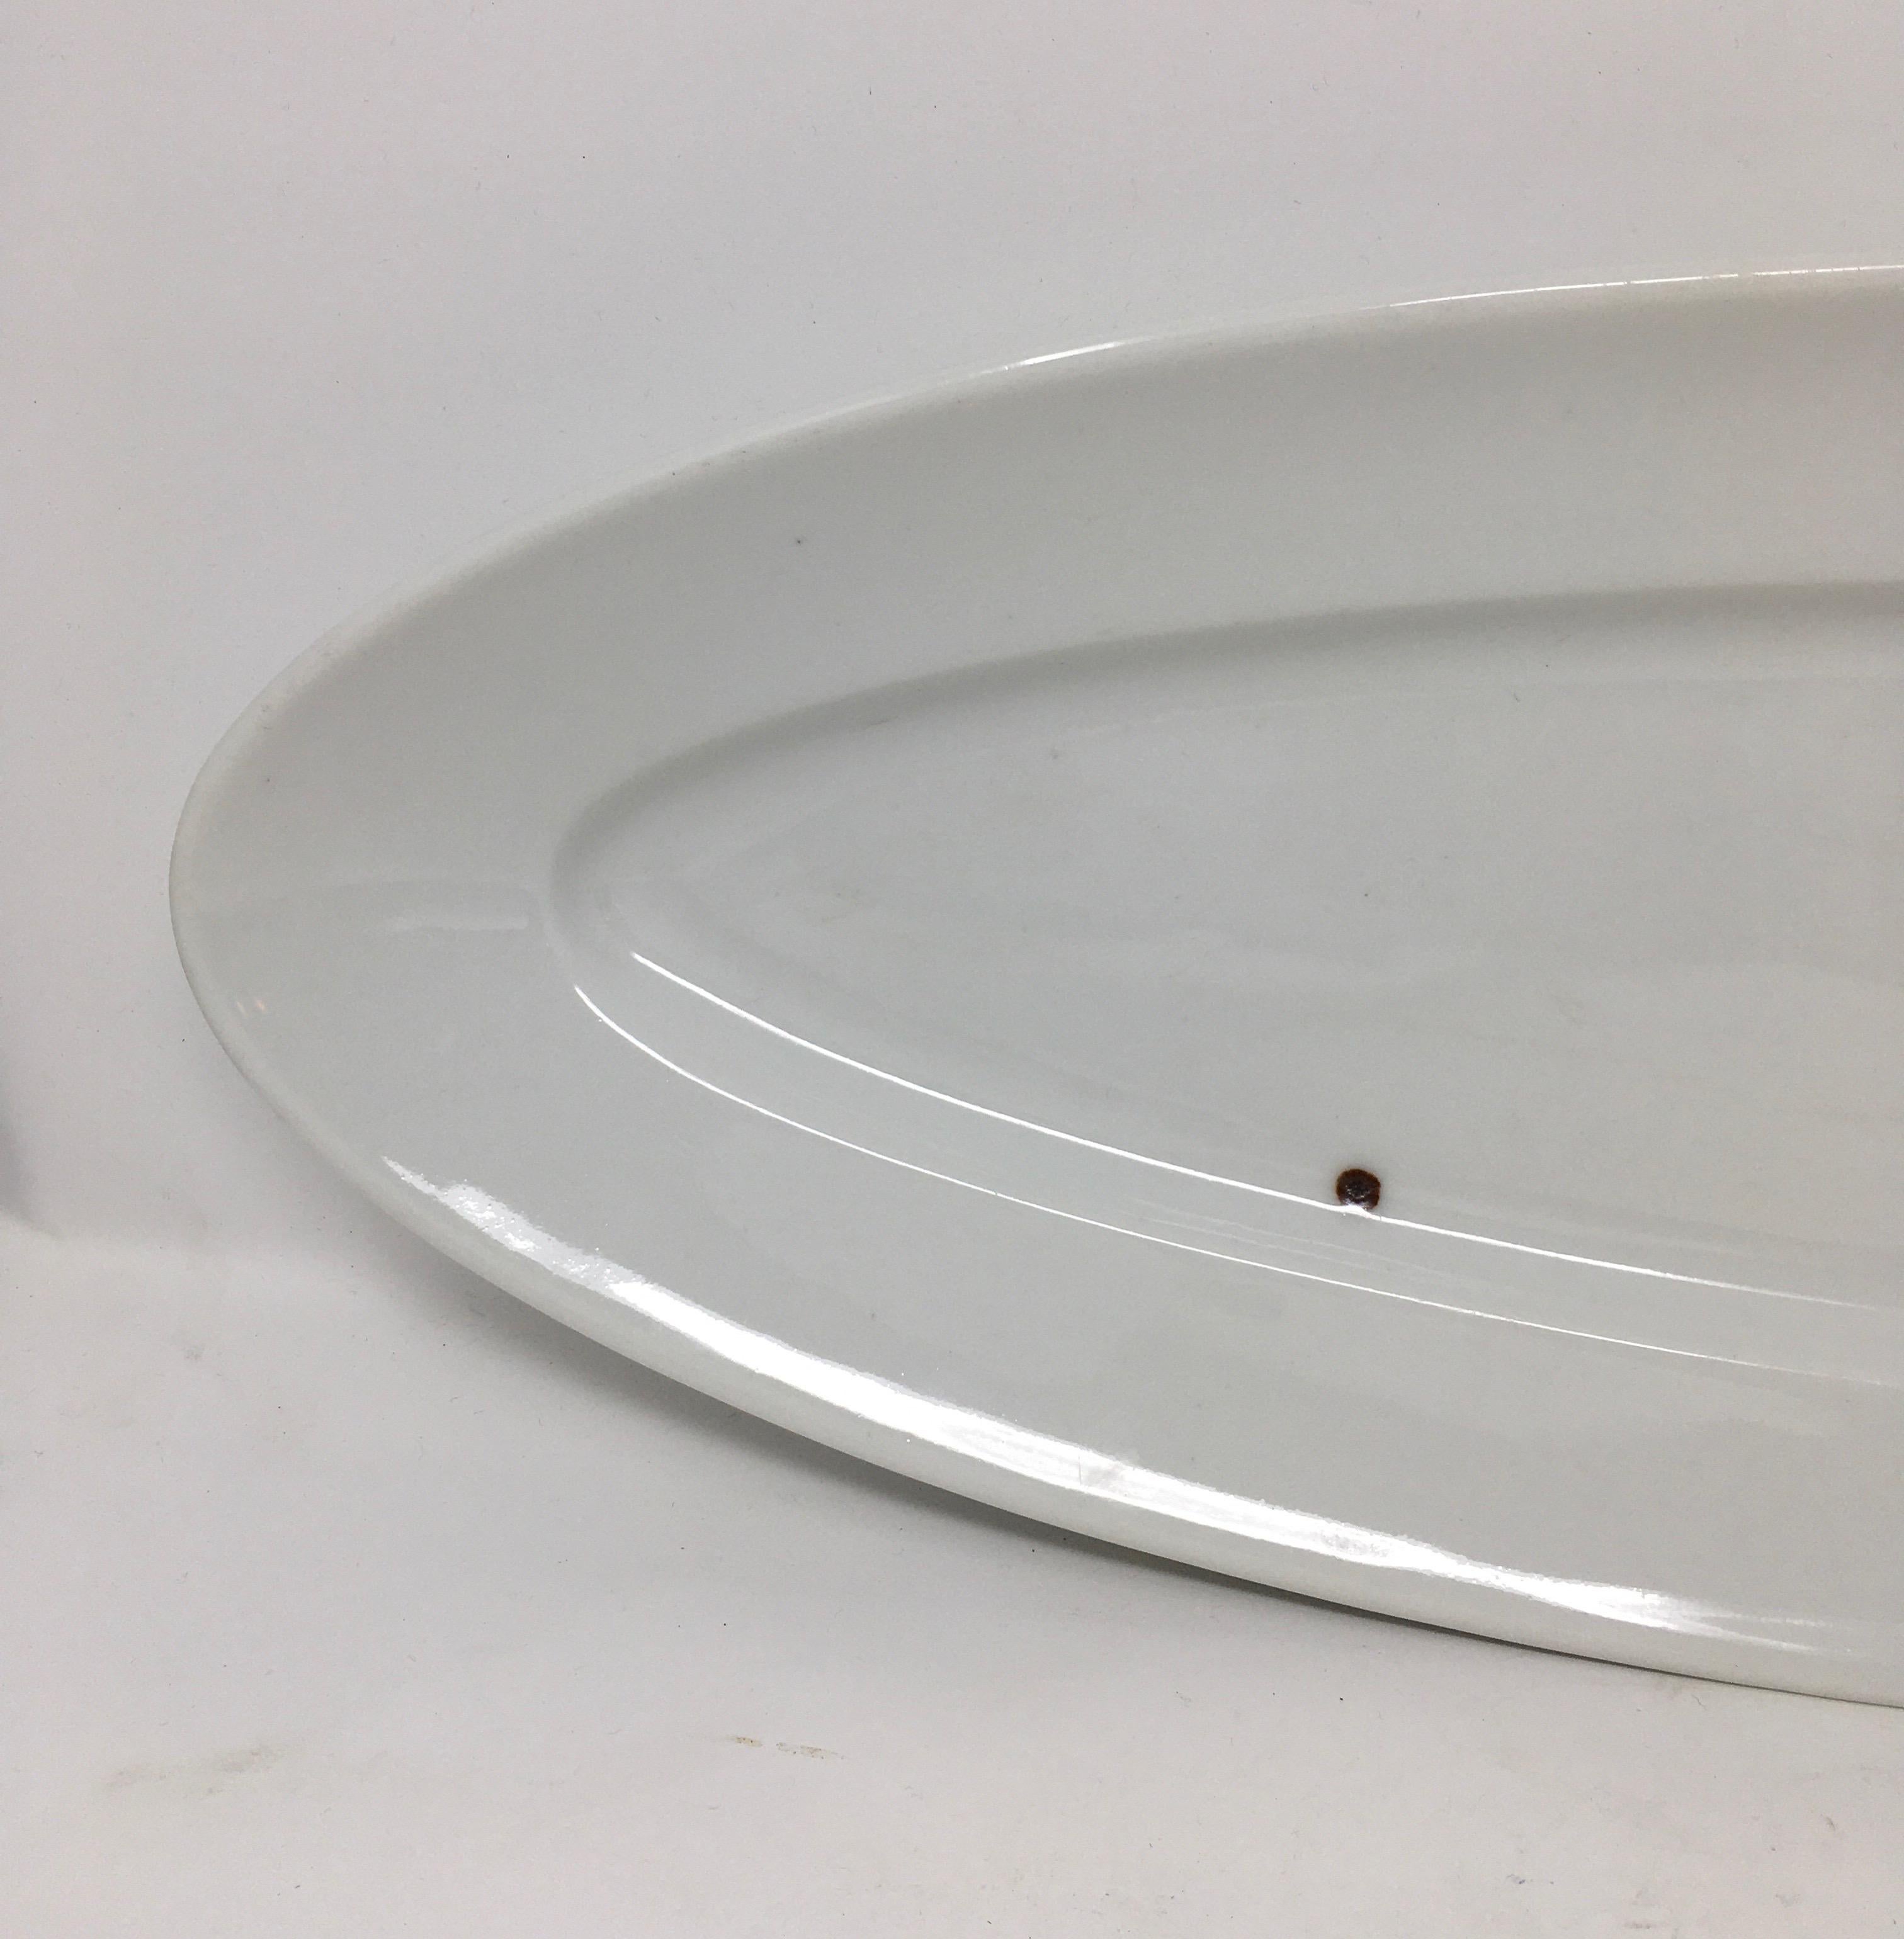 Found in the South of France, this long and elegant serving platter was used to serve fish and meats. Manufactured ironstone, the top surface has a slight glaze defect in which the ironstone shows through. This only adds to the charm of this piece.